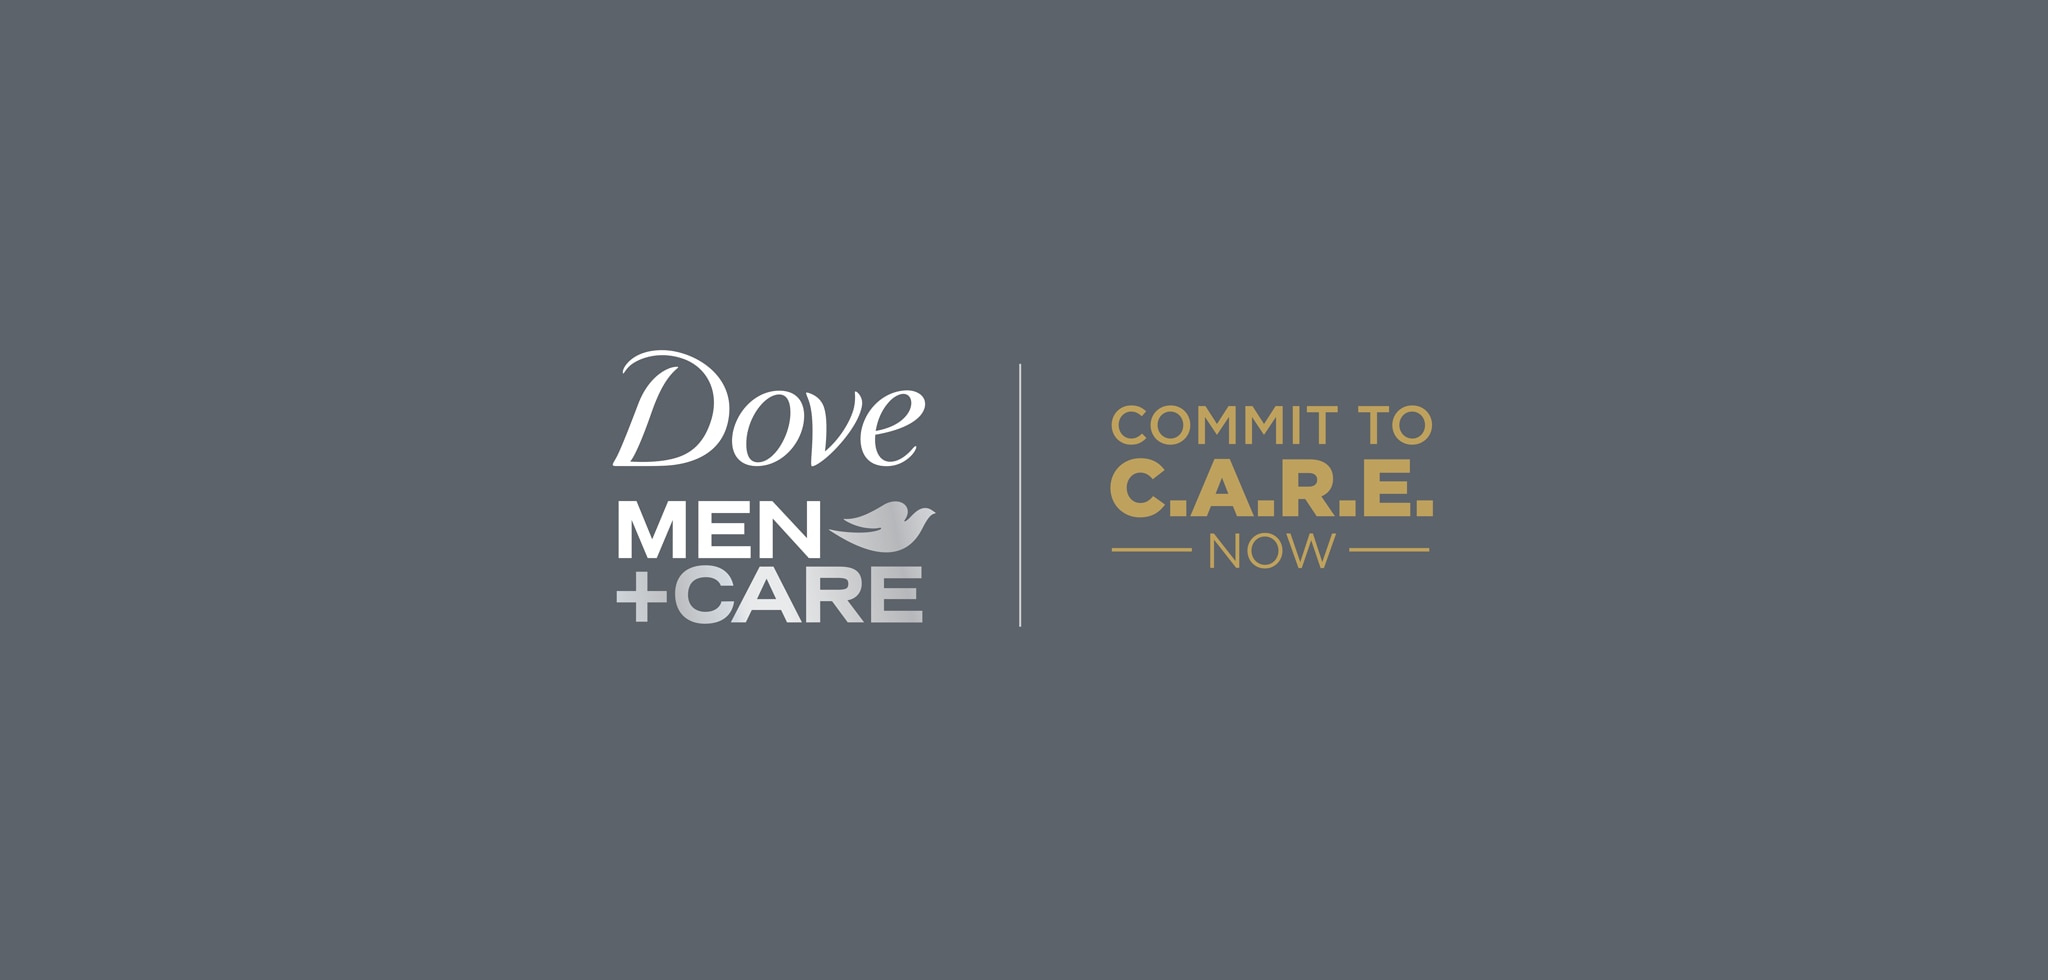 Dove Men+Care Commit to Care Now